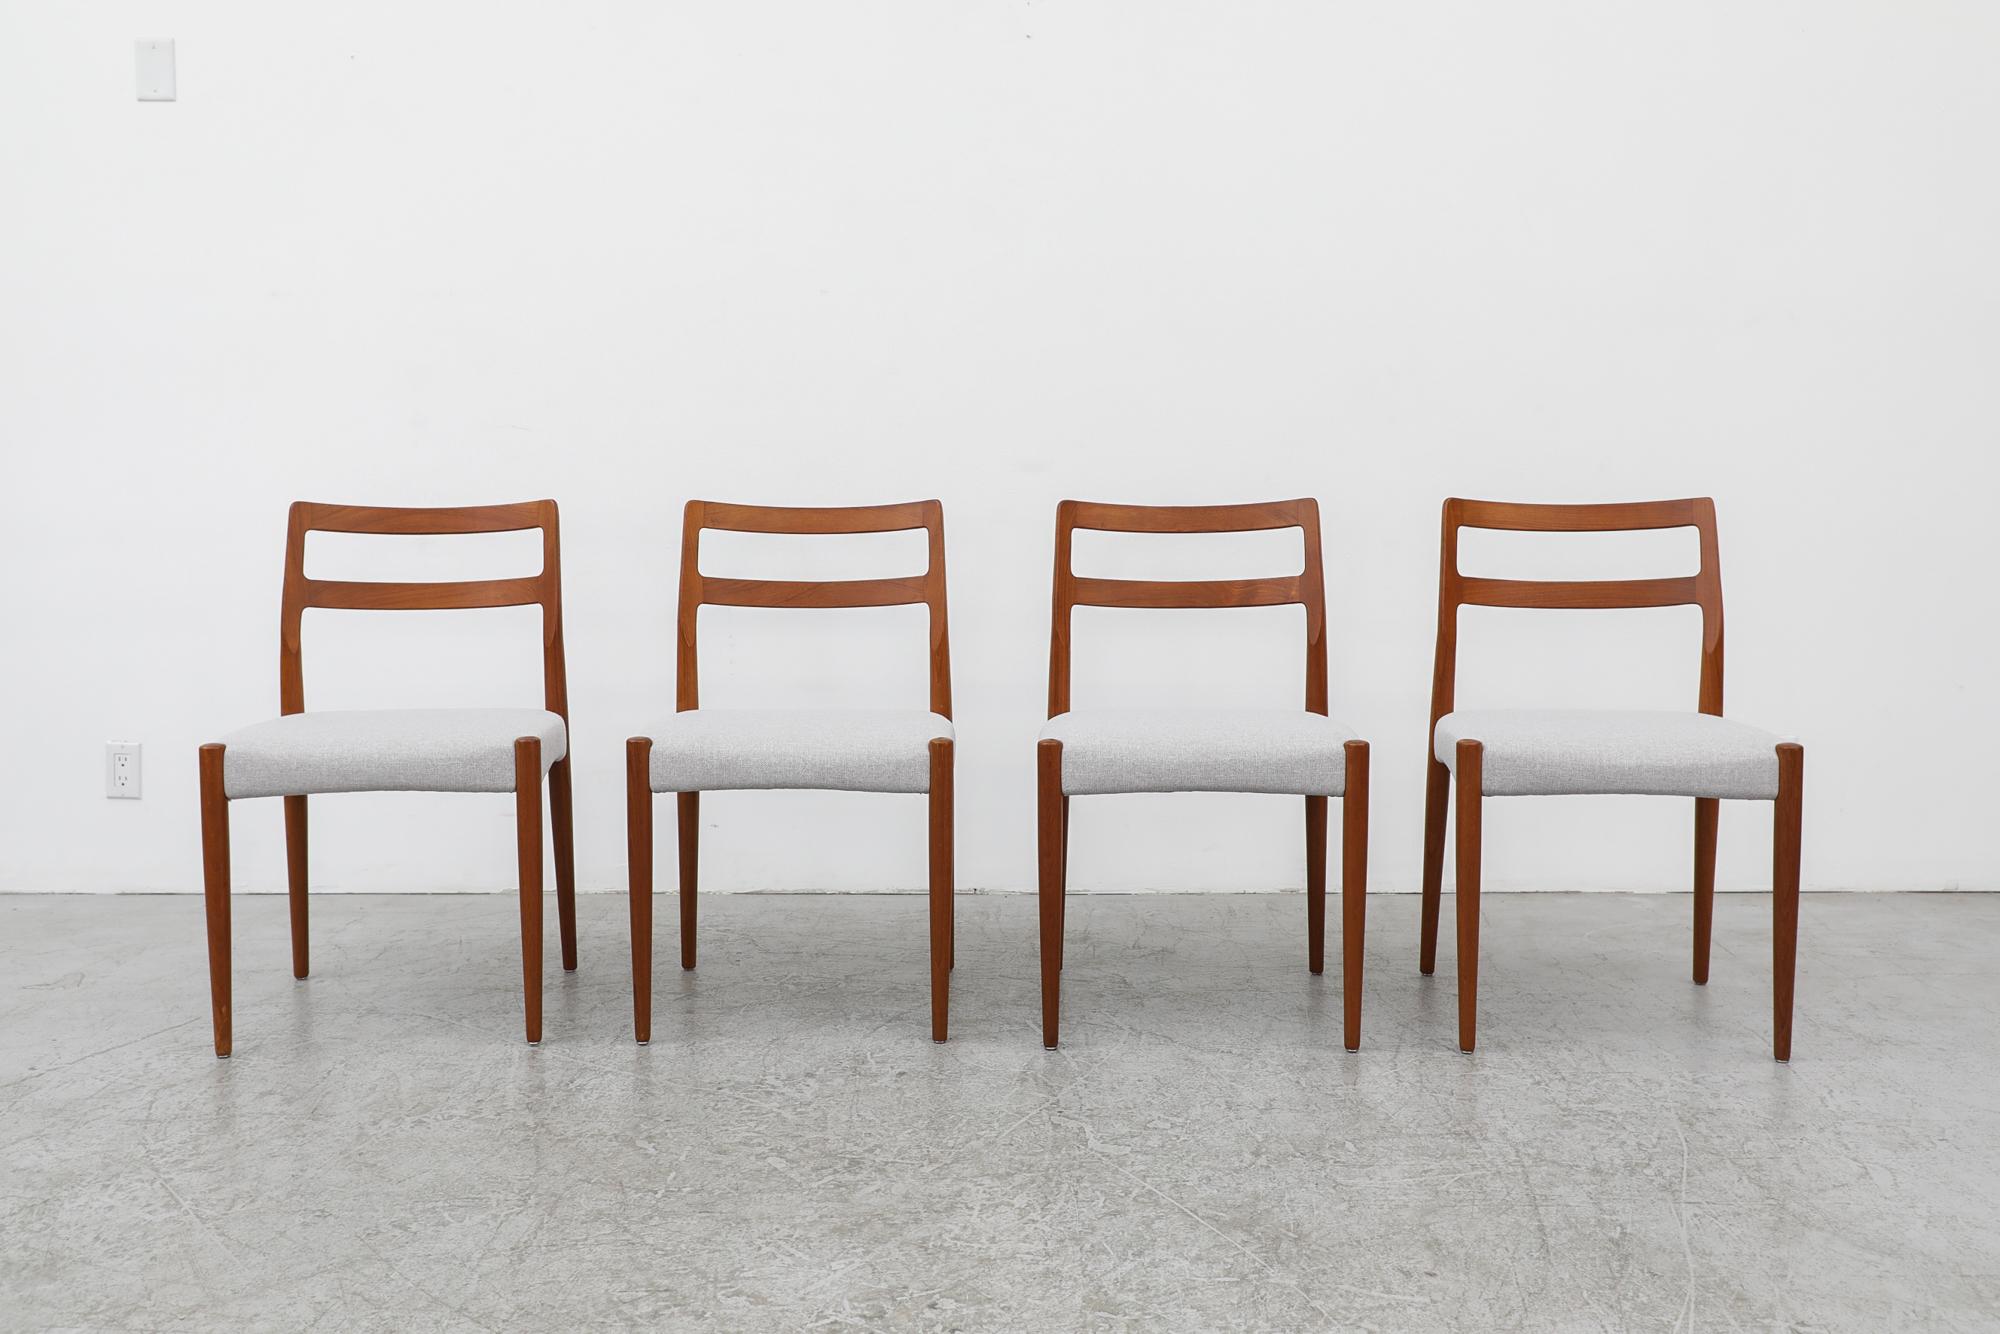 Set of 4 Johannes Andersen dining chairs with light gray upholstered seats. Andersen was a vastly influential designer, hailing from Denmark and designing for the Swedish company Trensum, as well as Danish companies like CFC Silkeborg, Uldum, J.